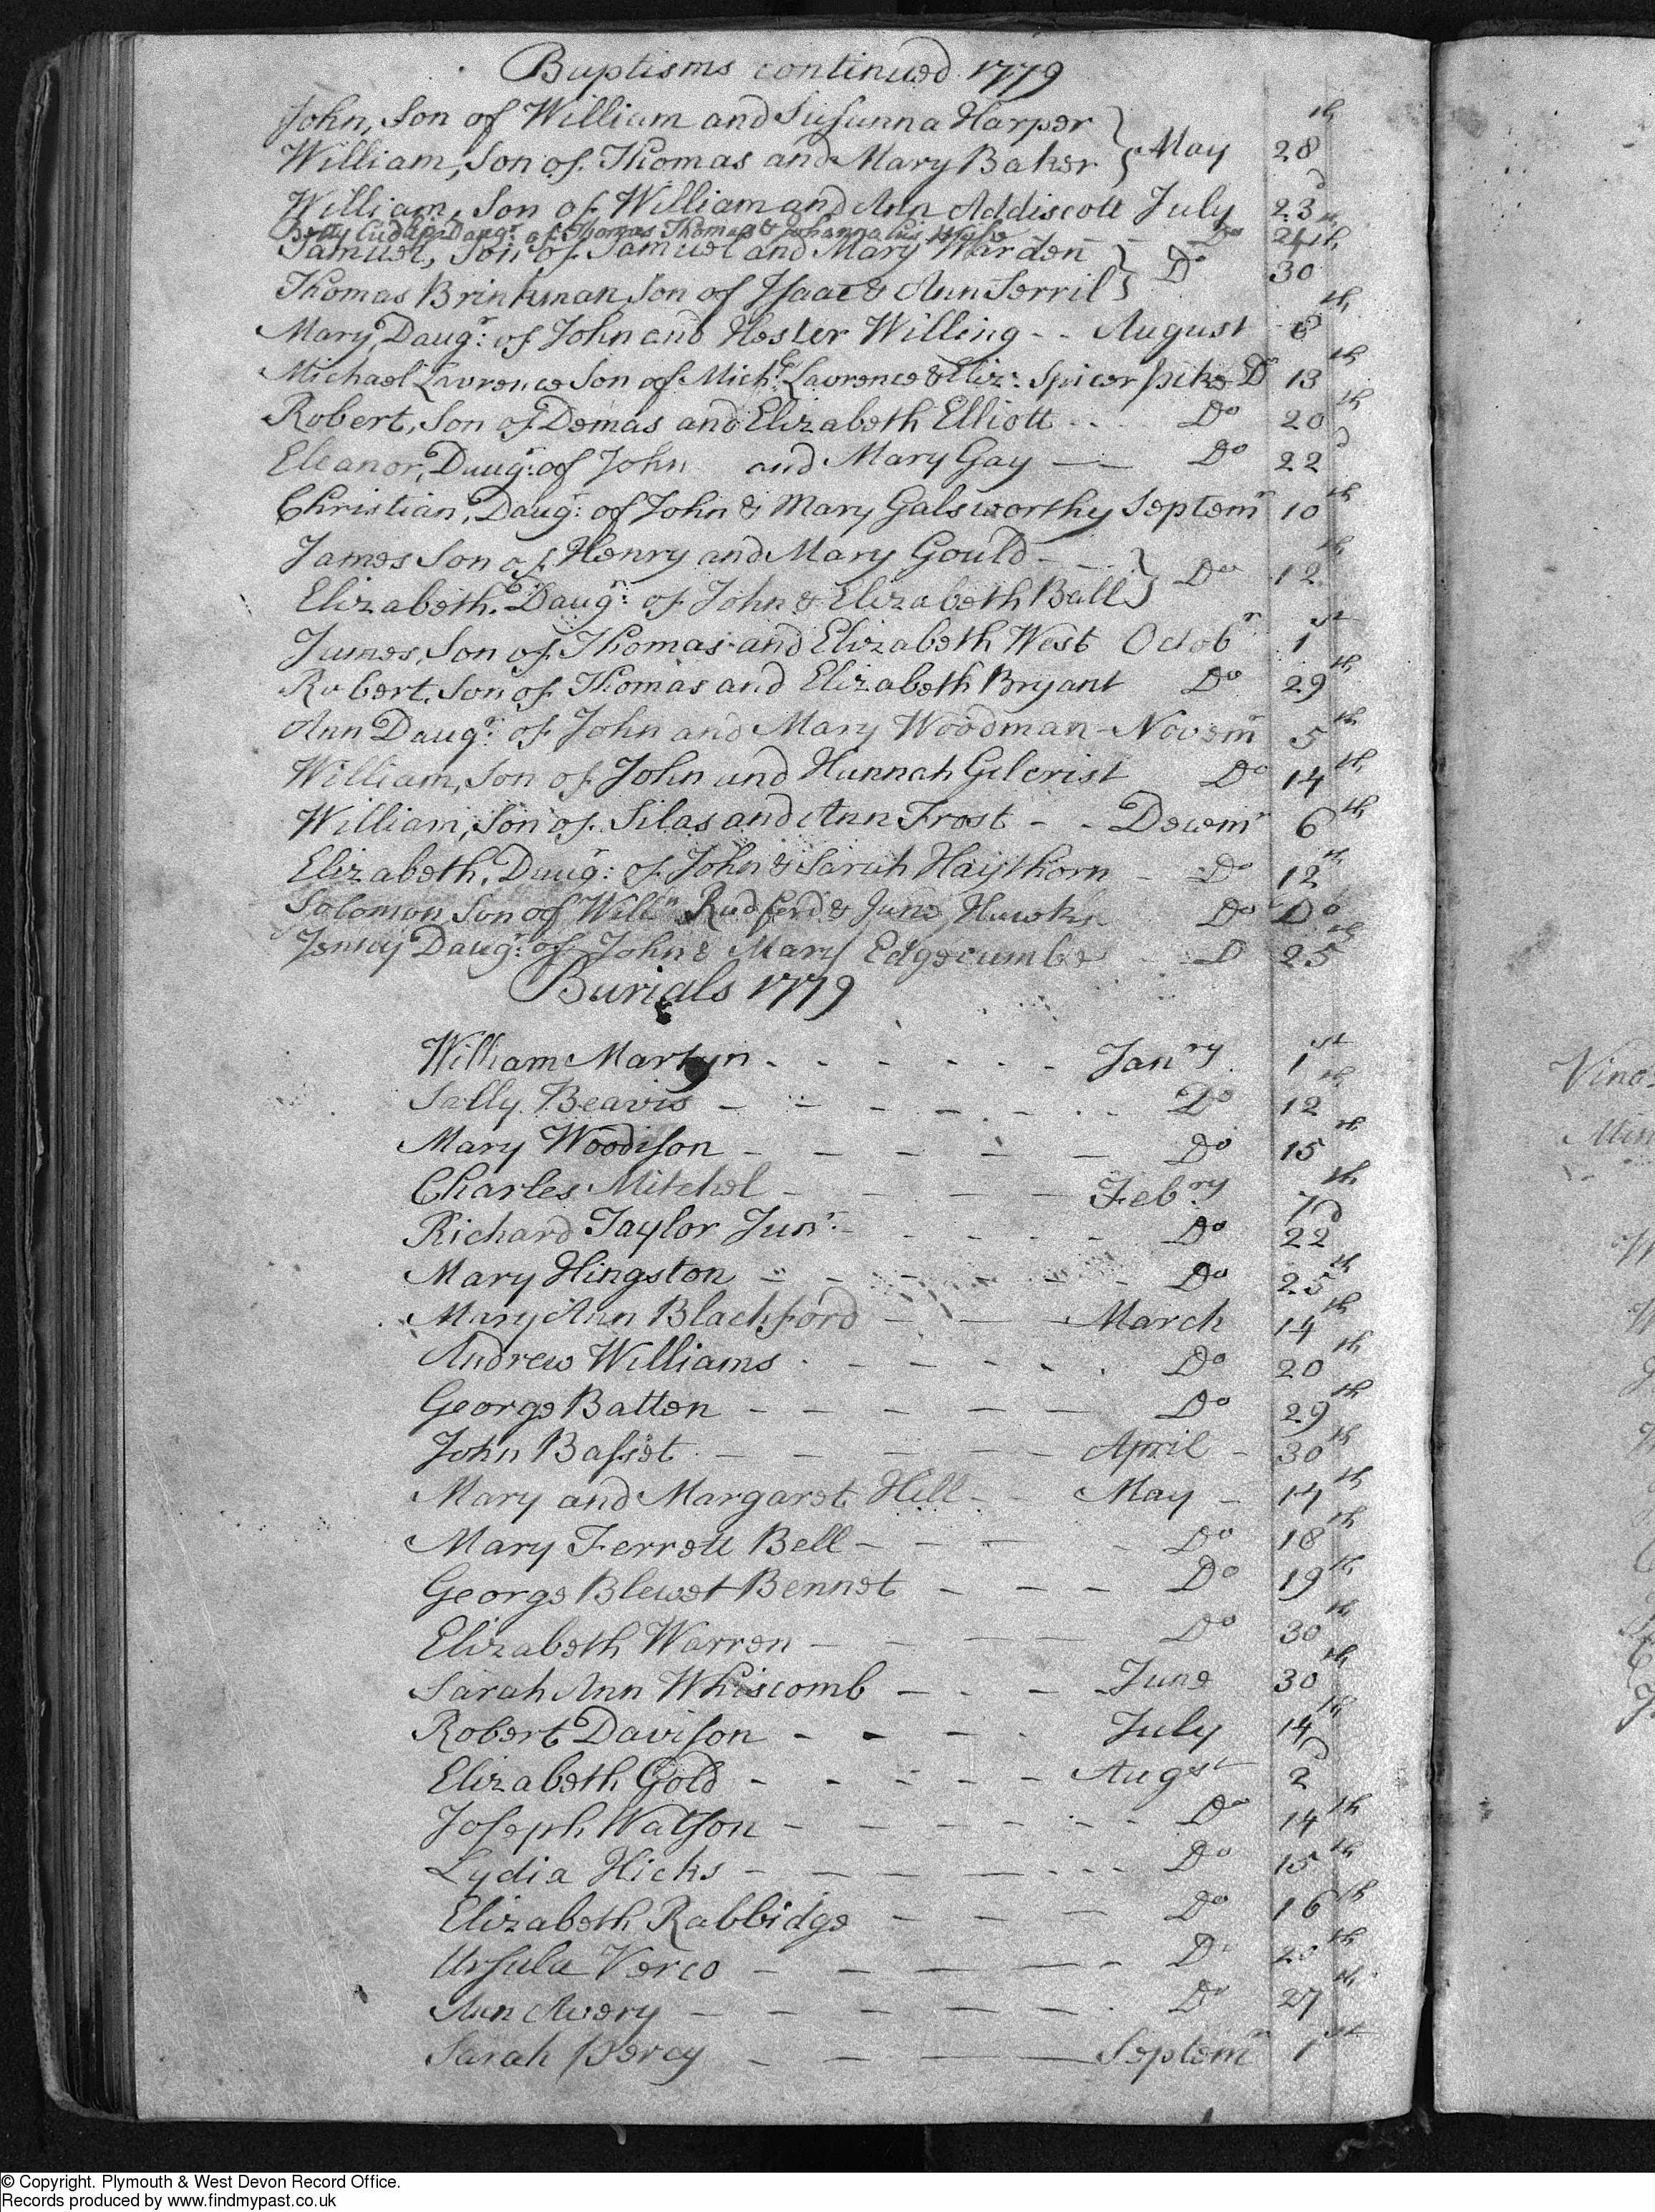 C:\Users\Virginia Rundle\Documents\Ancestry\Northey Moar Files\Galsworthy\Baptism of GALSWORTHY_CHRISTIAN 1779.jpg